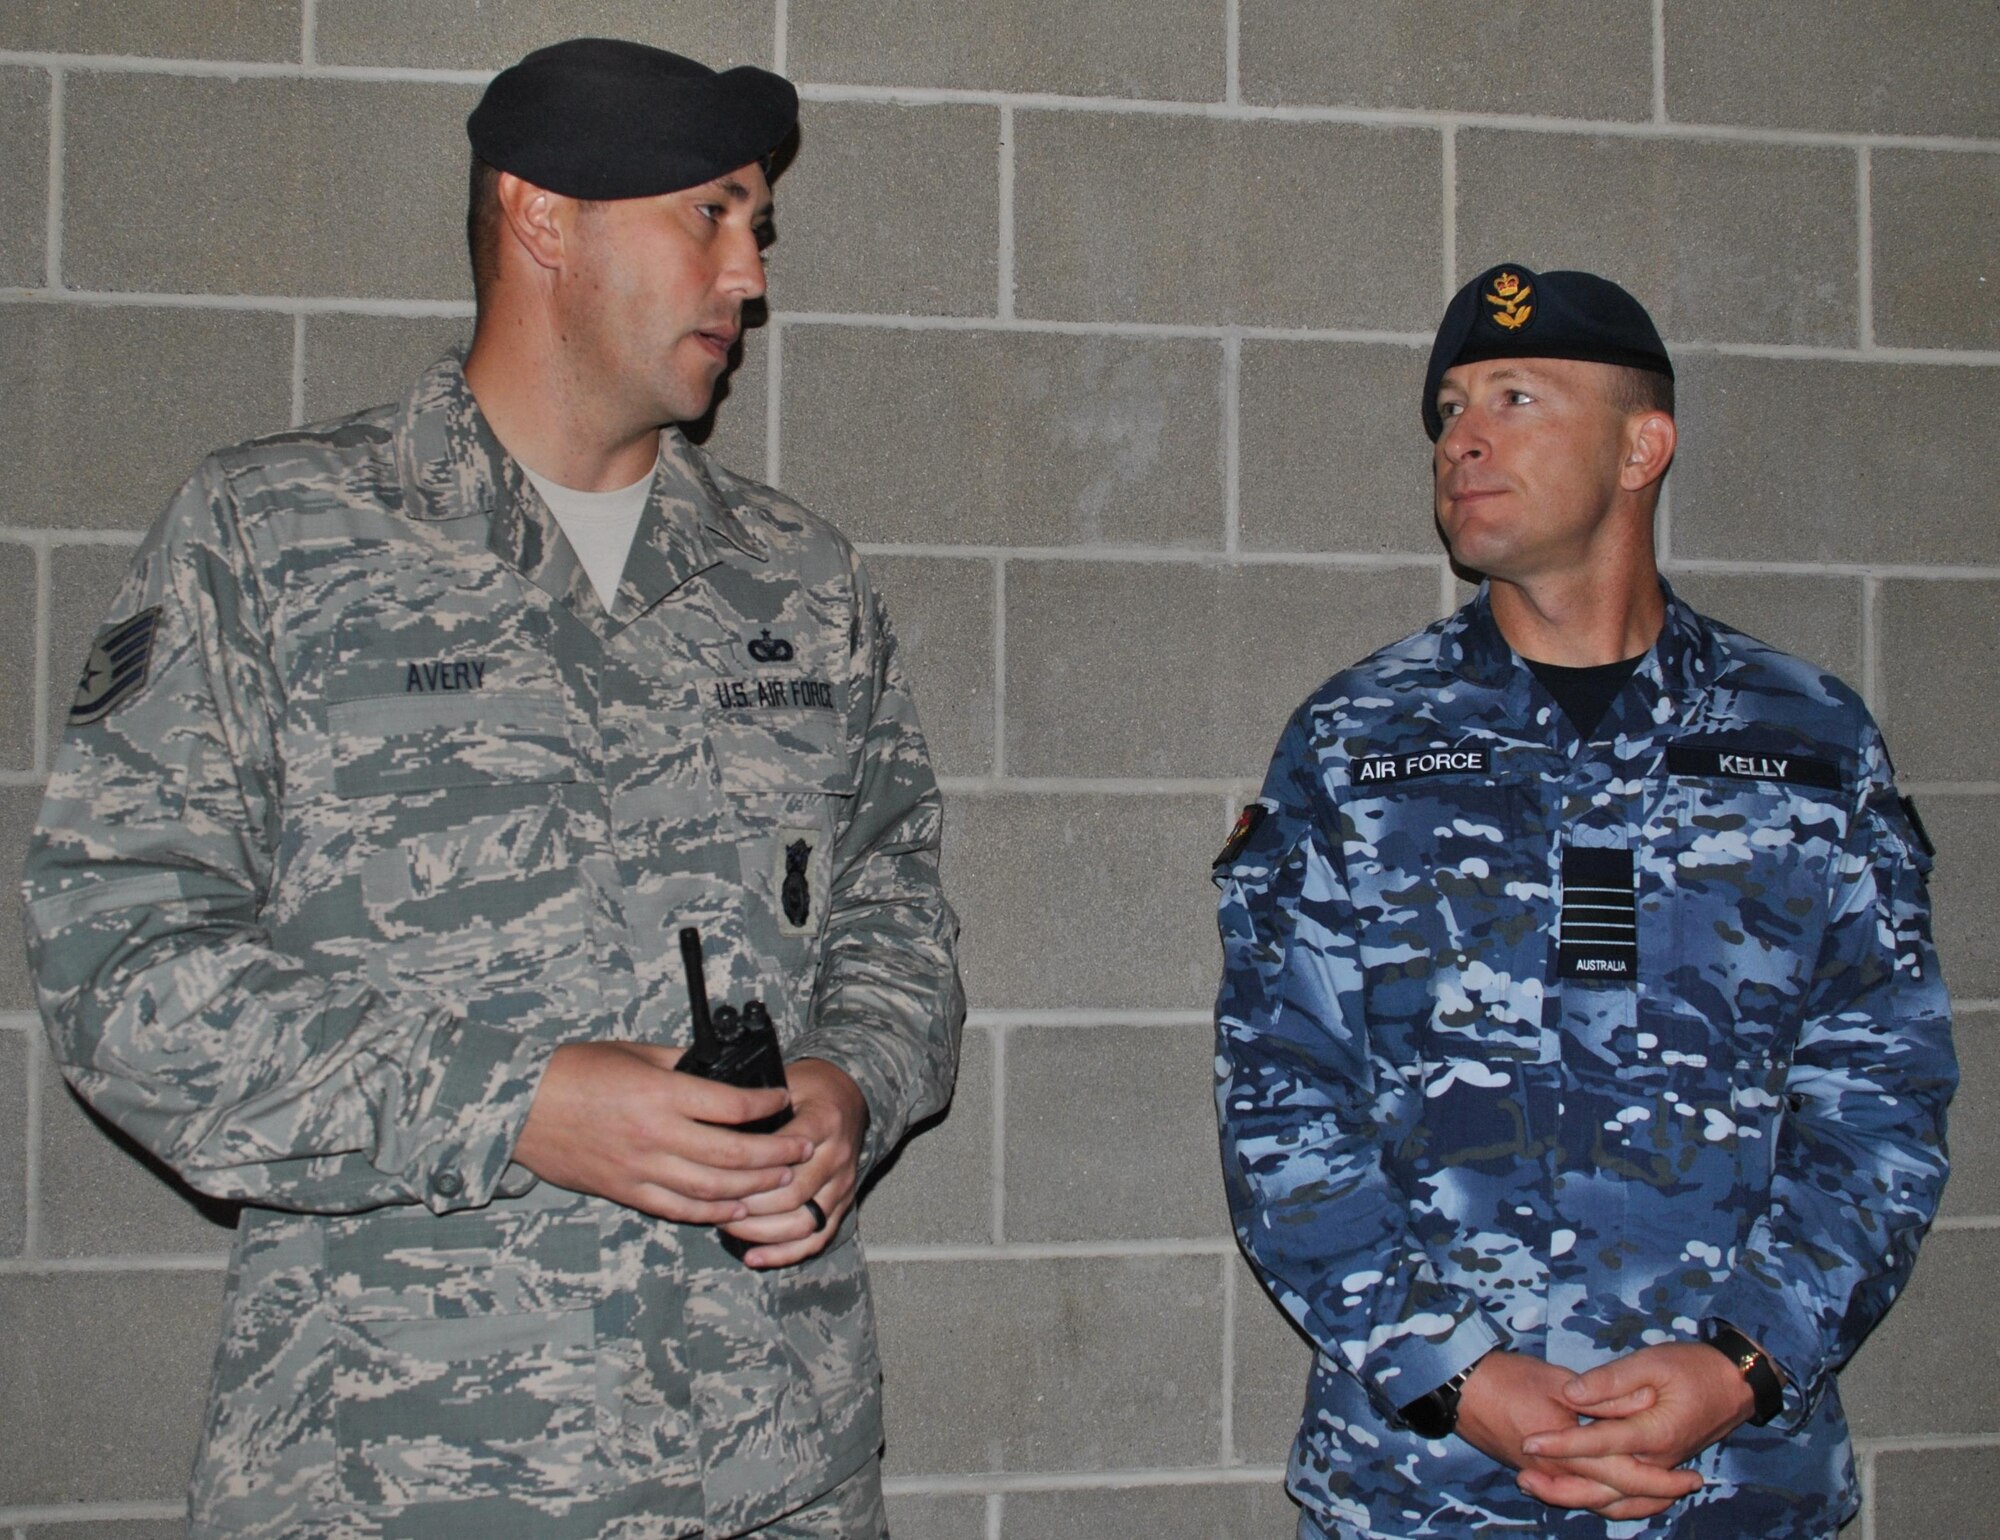 U.S. Air Force Staff Sgt. Kevin Avery briefs Royal Australian Air Force Group Capt. Wayne Kelly during a domestics training exercise at Lackland Medina Training Annex. During the demonstration, Avery explained how to defuse a domestic violence situation involving Airmen living on base. (U.S. Air Force photo/Carole Chiles Fuller/Released)  
